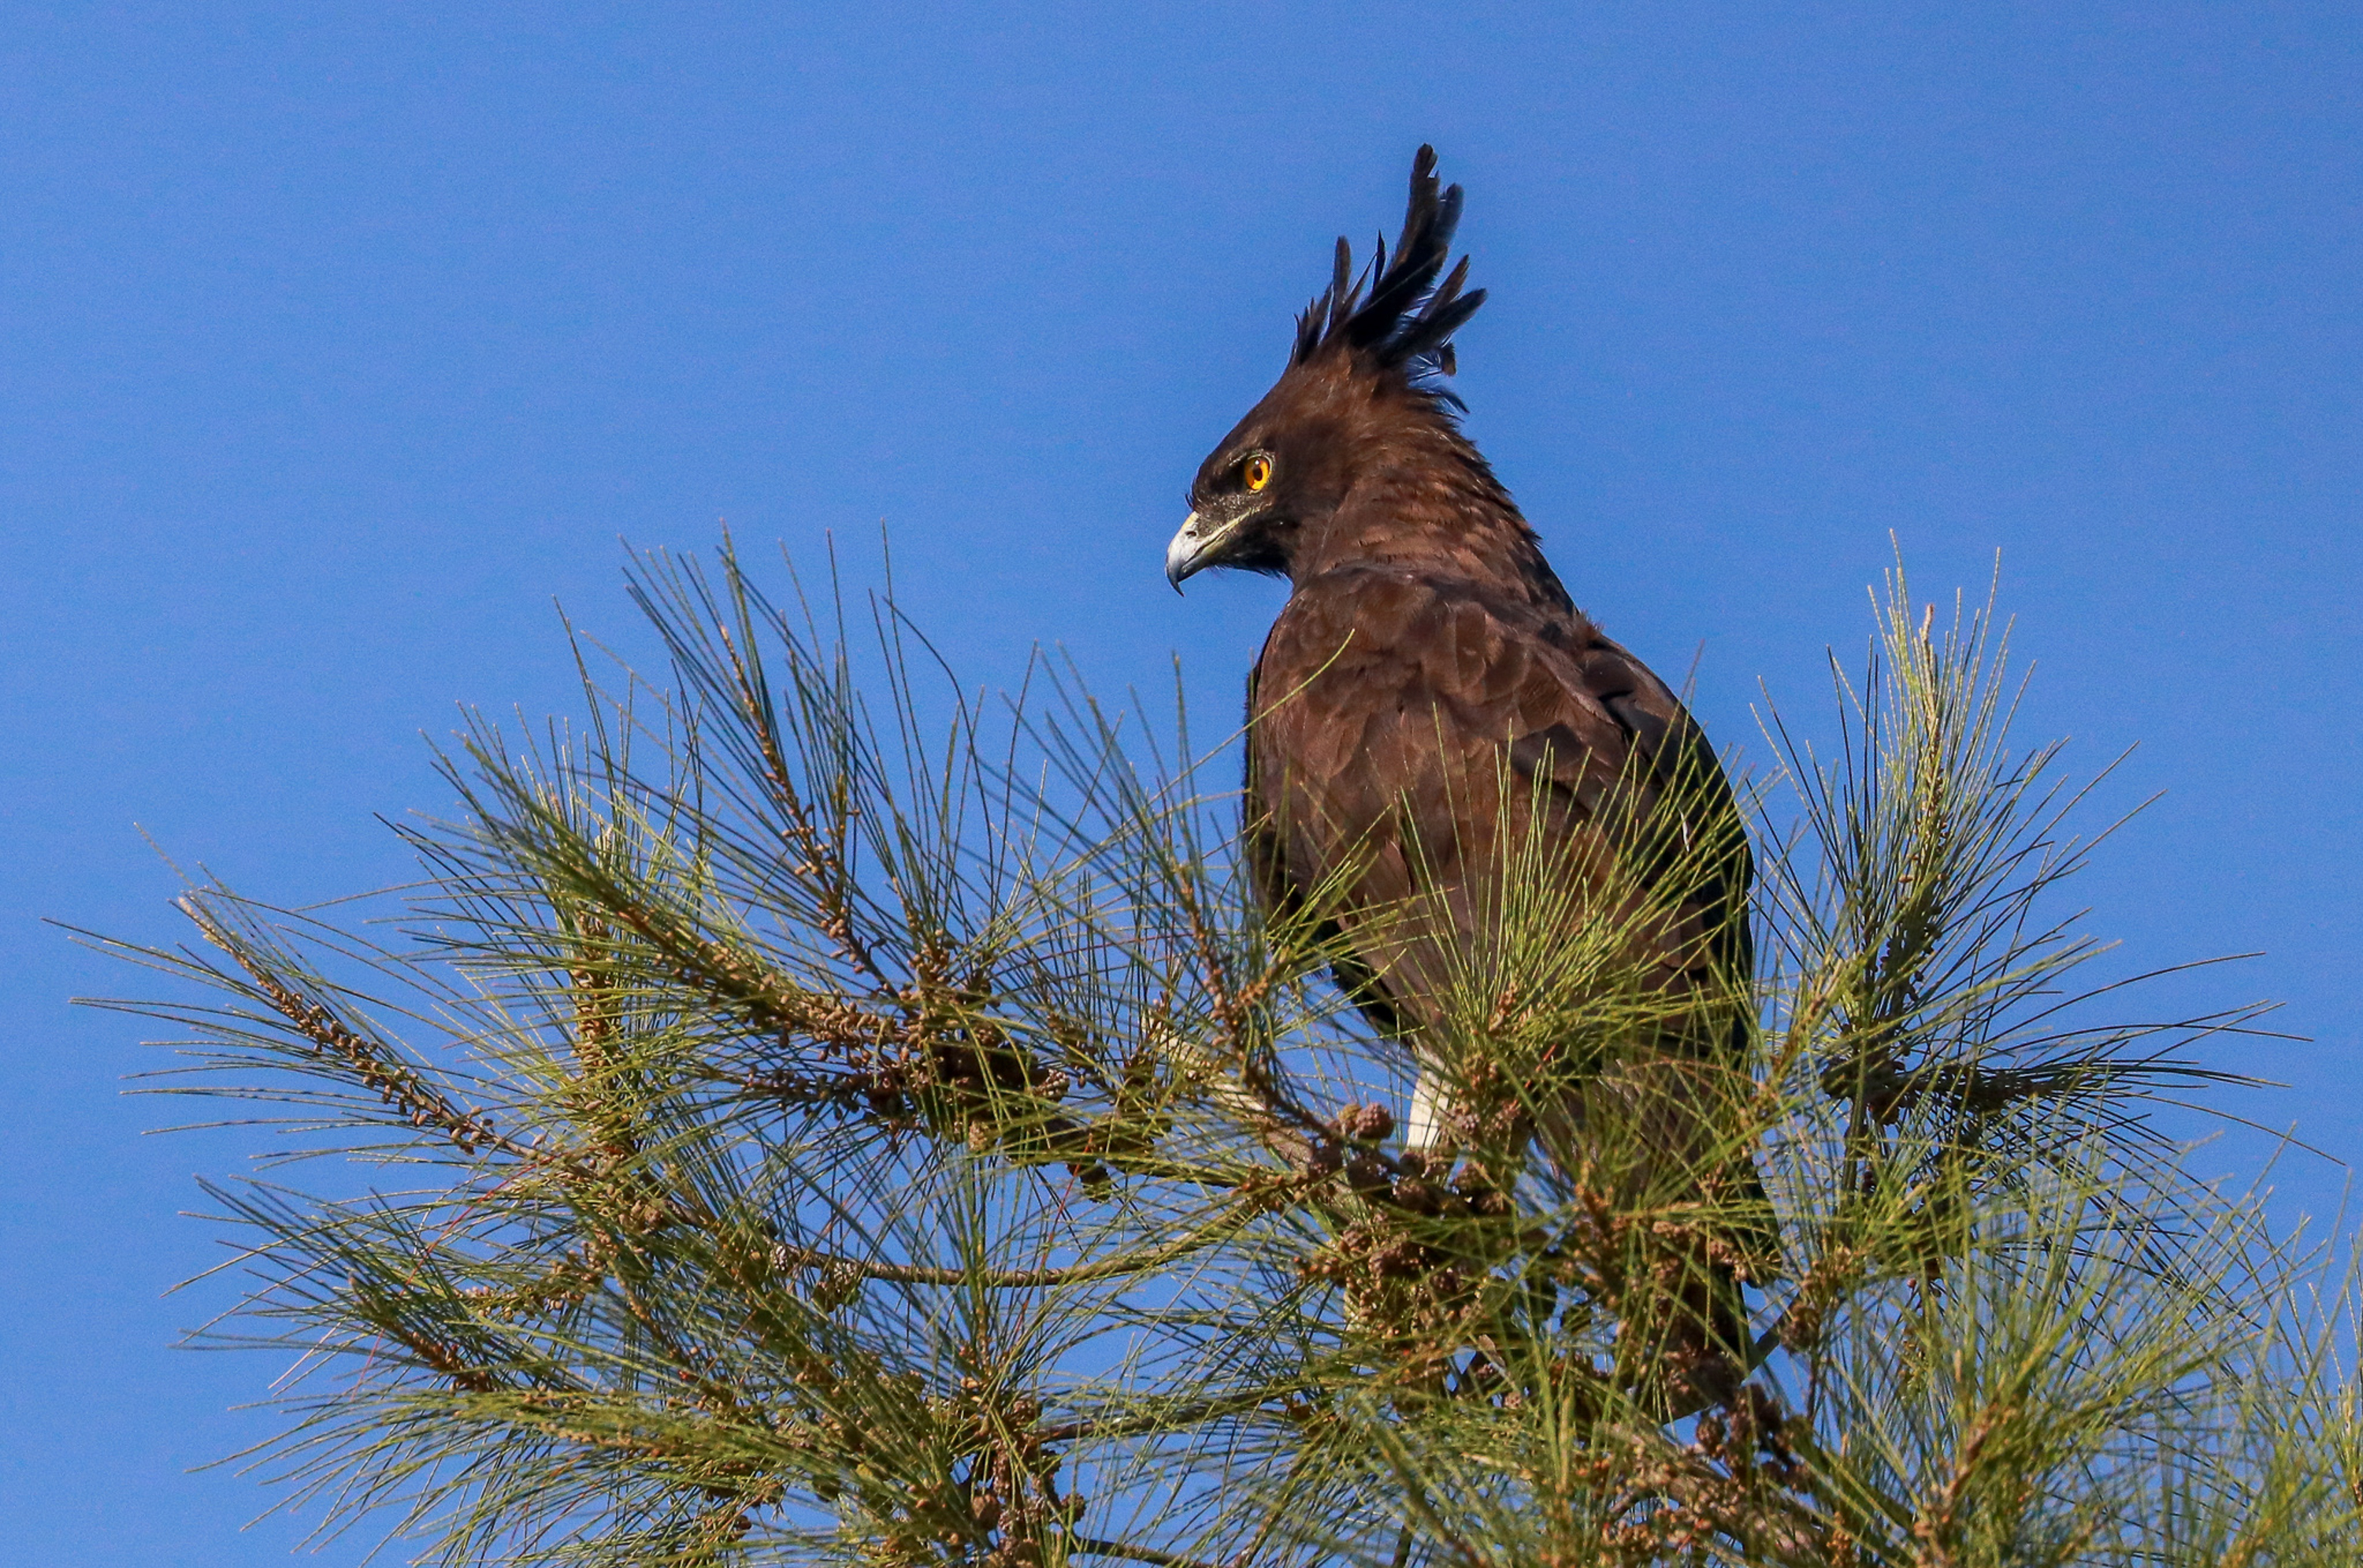 A Long-crested Eagle perches in a tree in Kenya